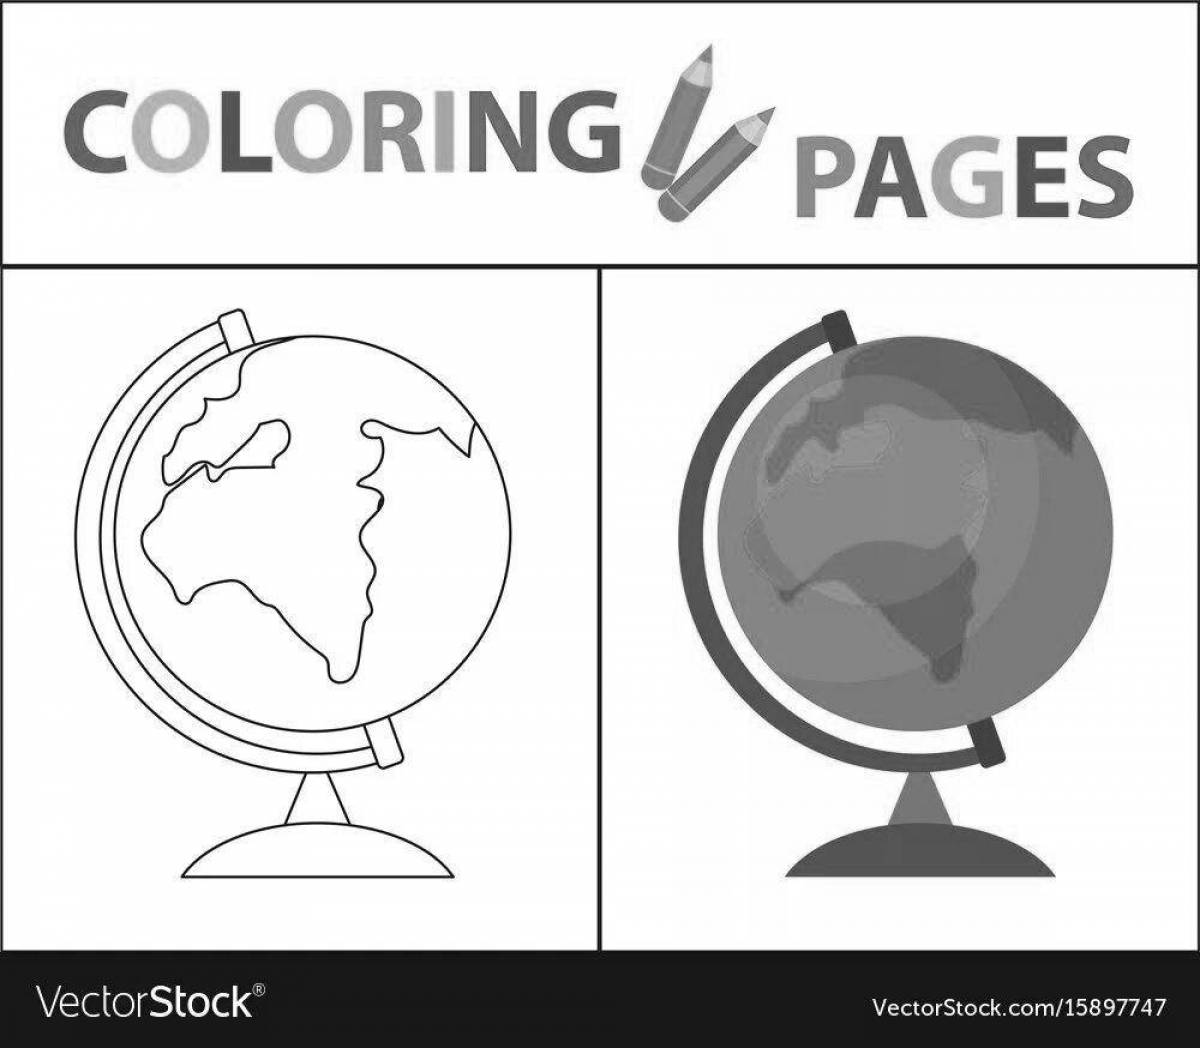 Exquisite globe coloring page